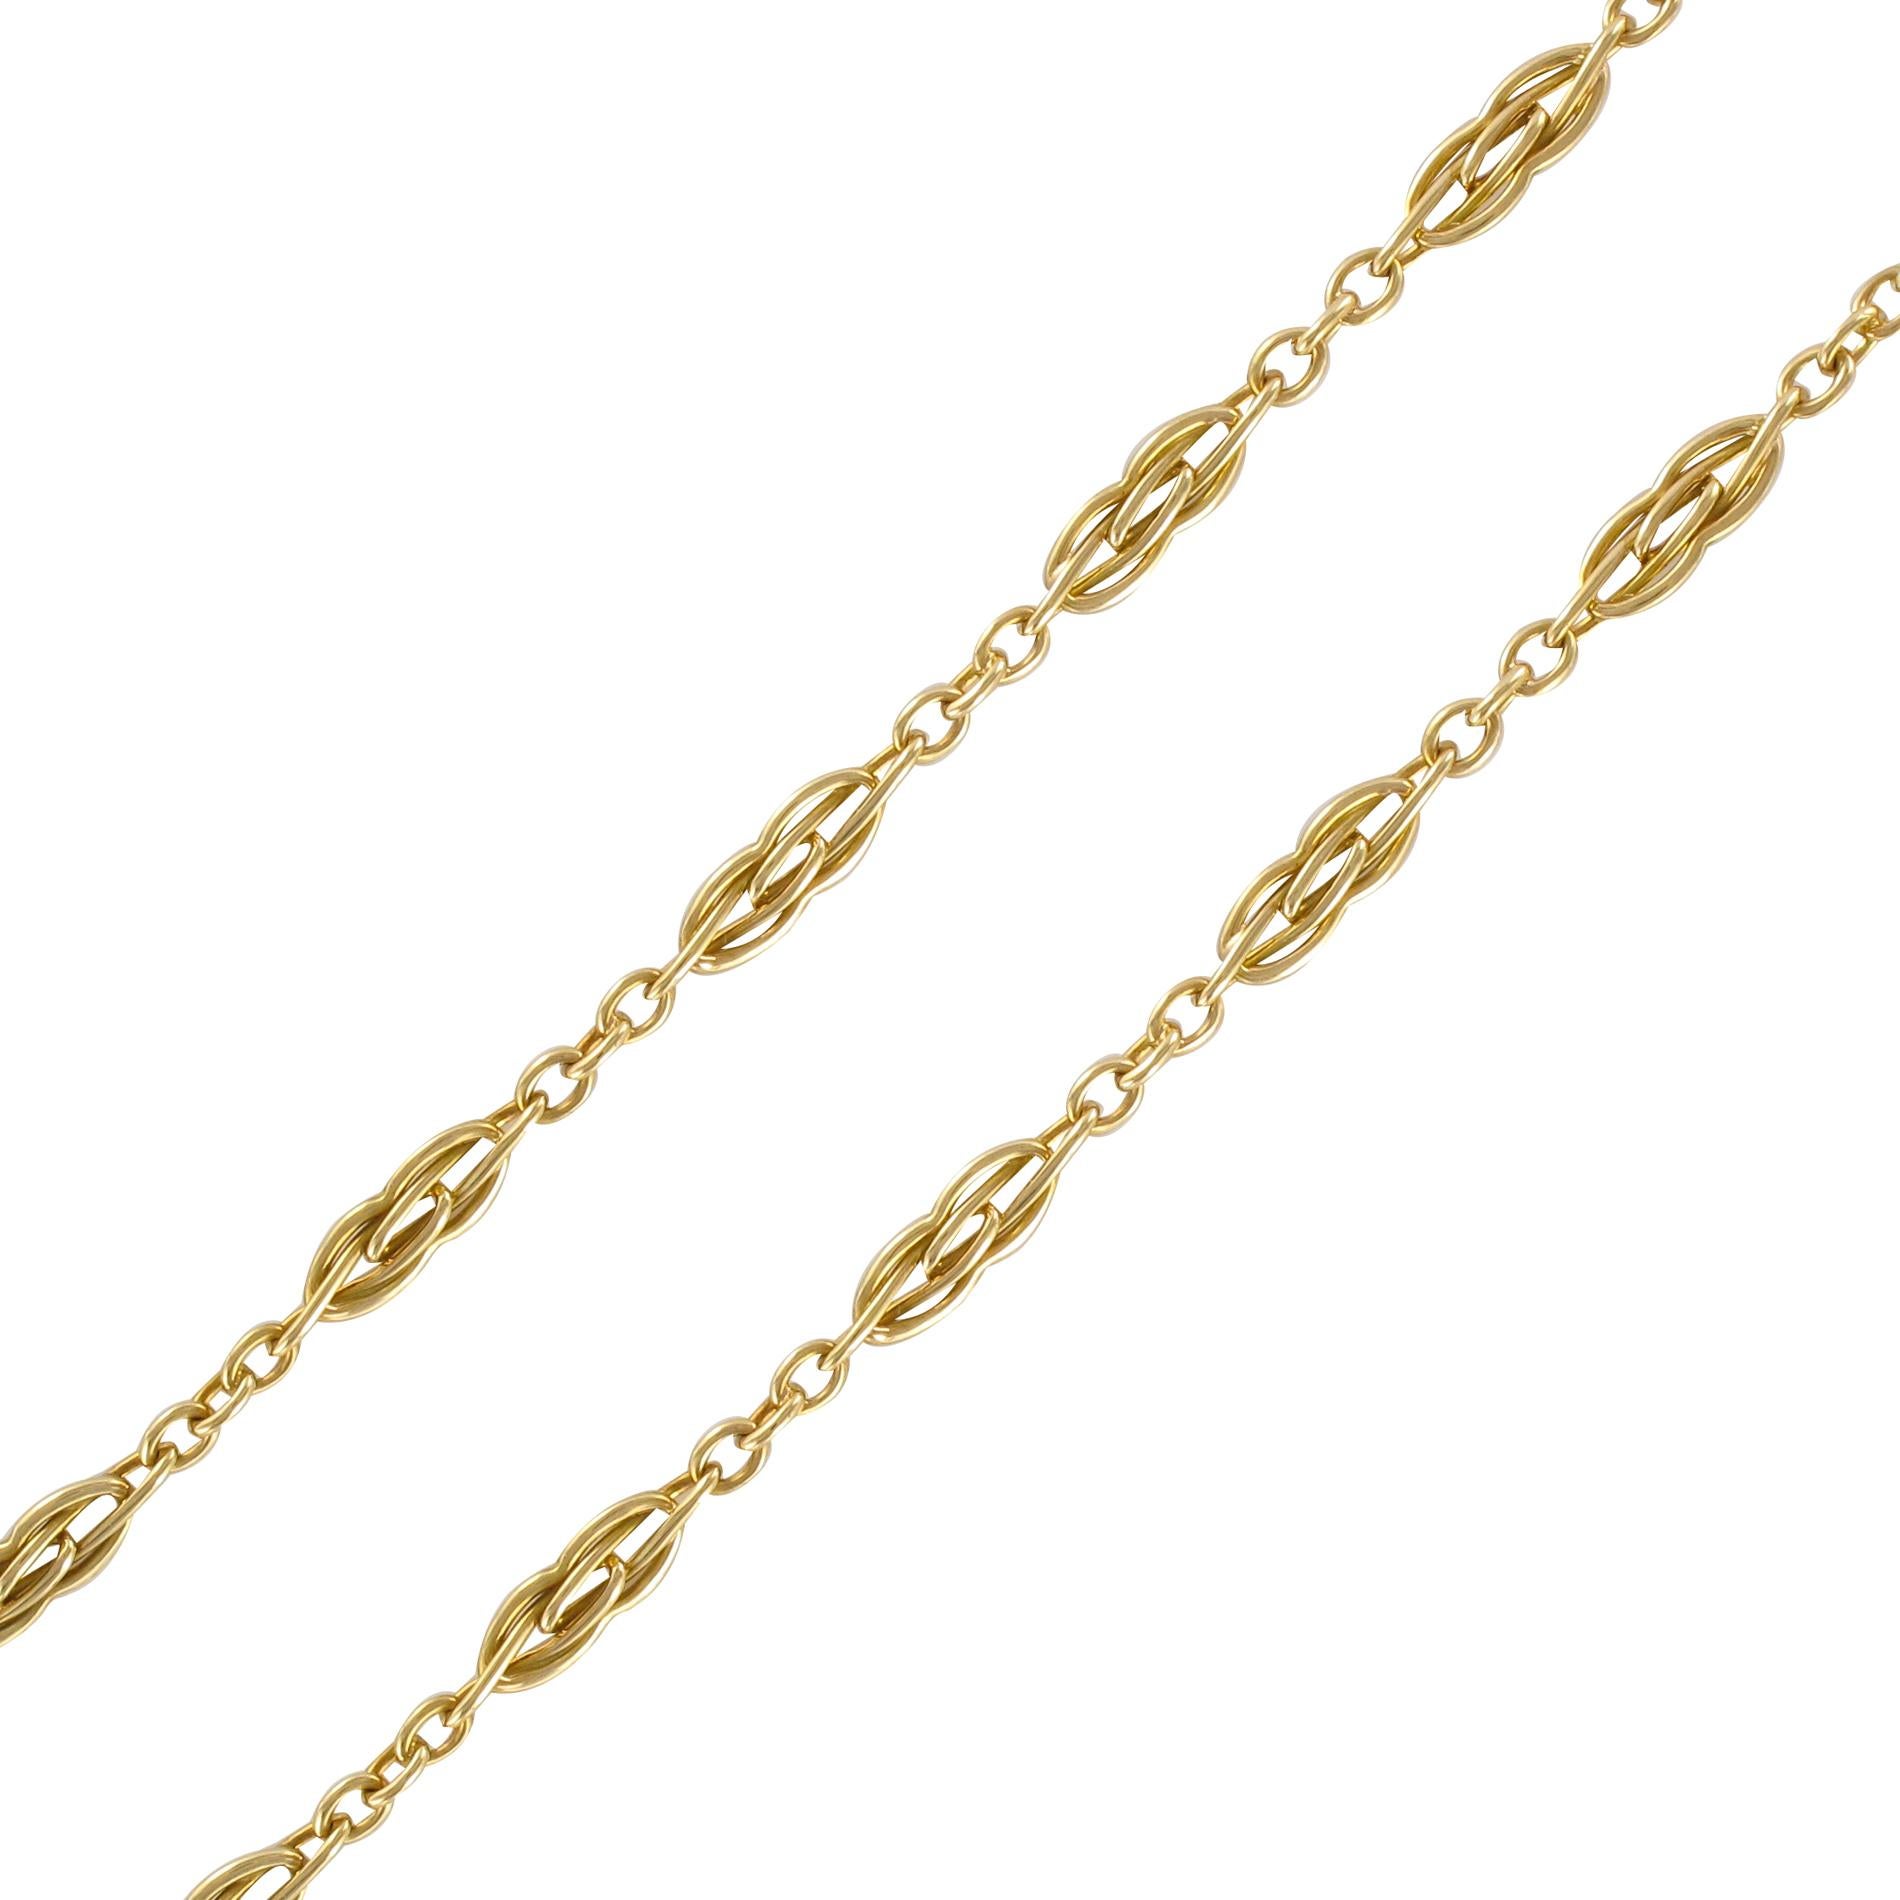 Long necklace in 18 karat yellow gold, mixed hallmark.
This lovely antique necklace is made of shuttle-shaped links made of intertwined gold threads, separated by gold rings. The clasp is a double spring ring.
Length: 88.5 cm, width: 3.6 mm,